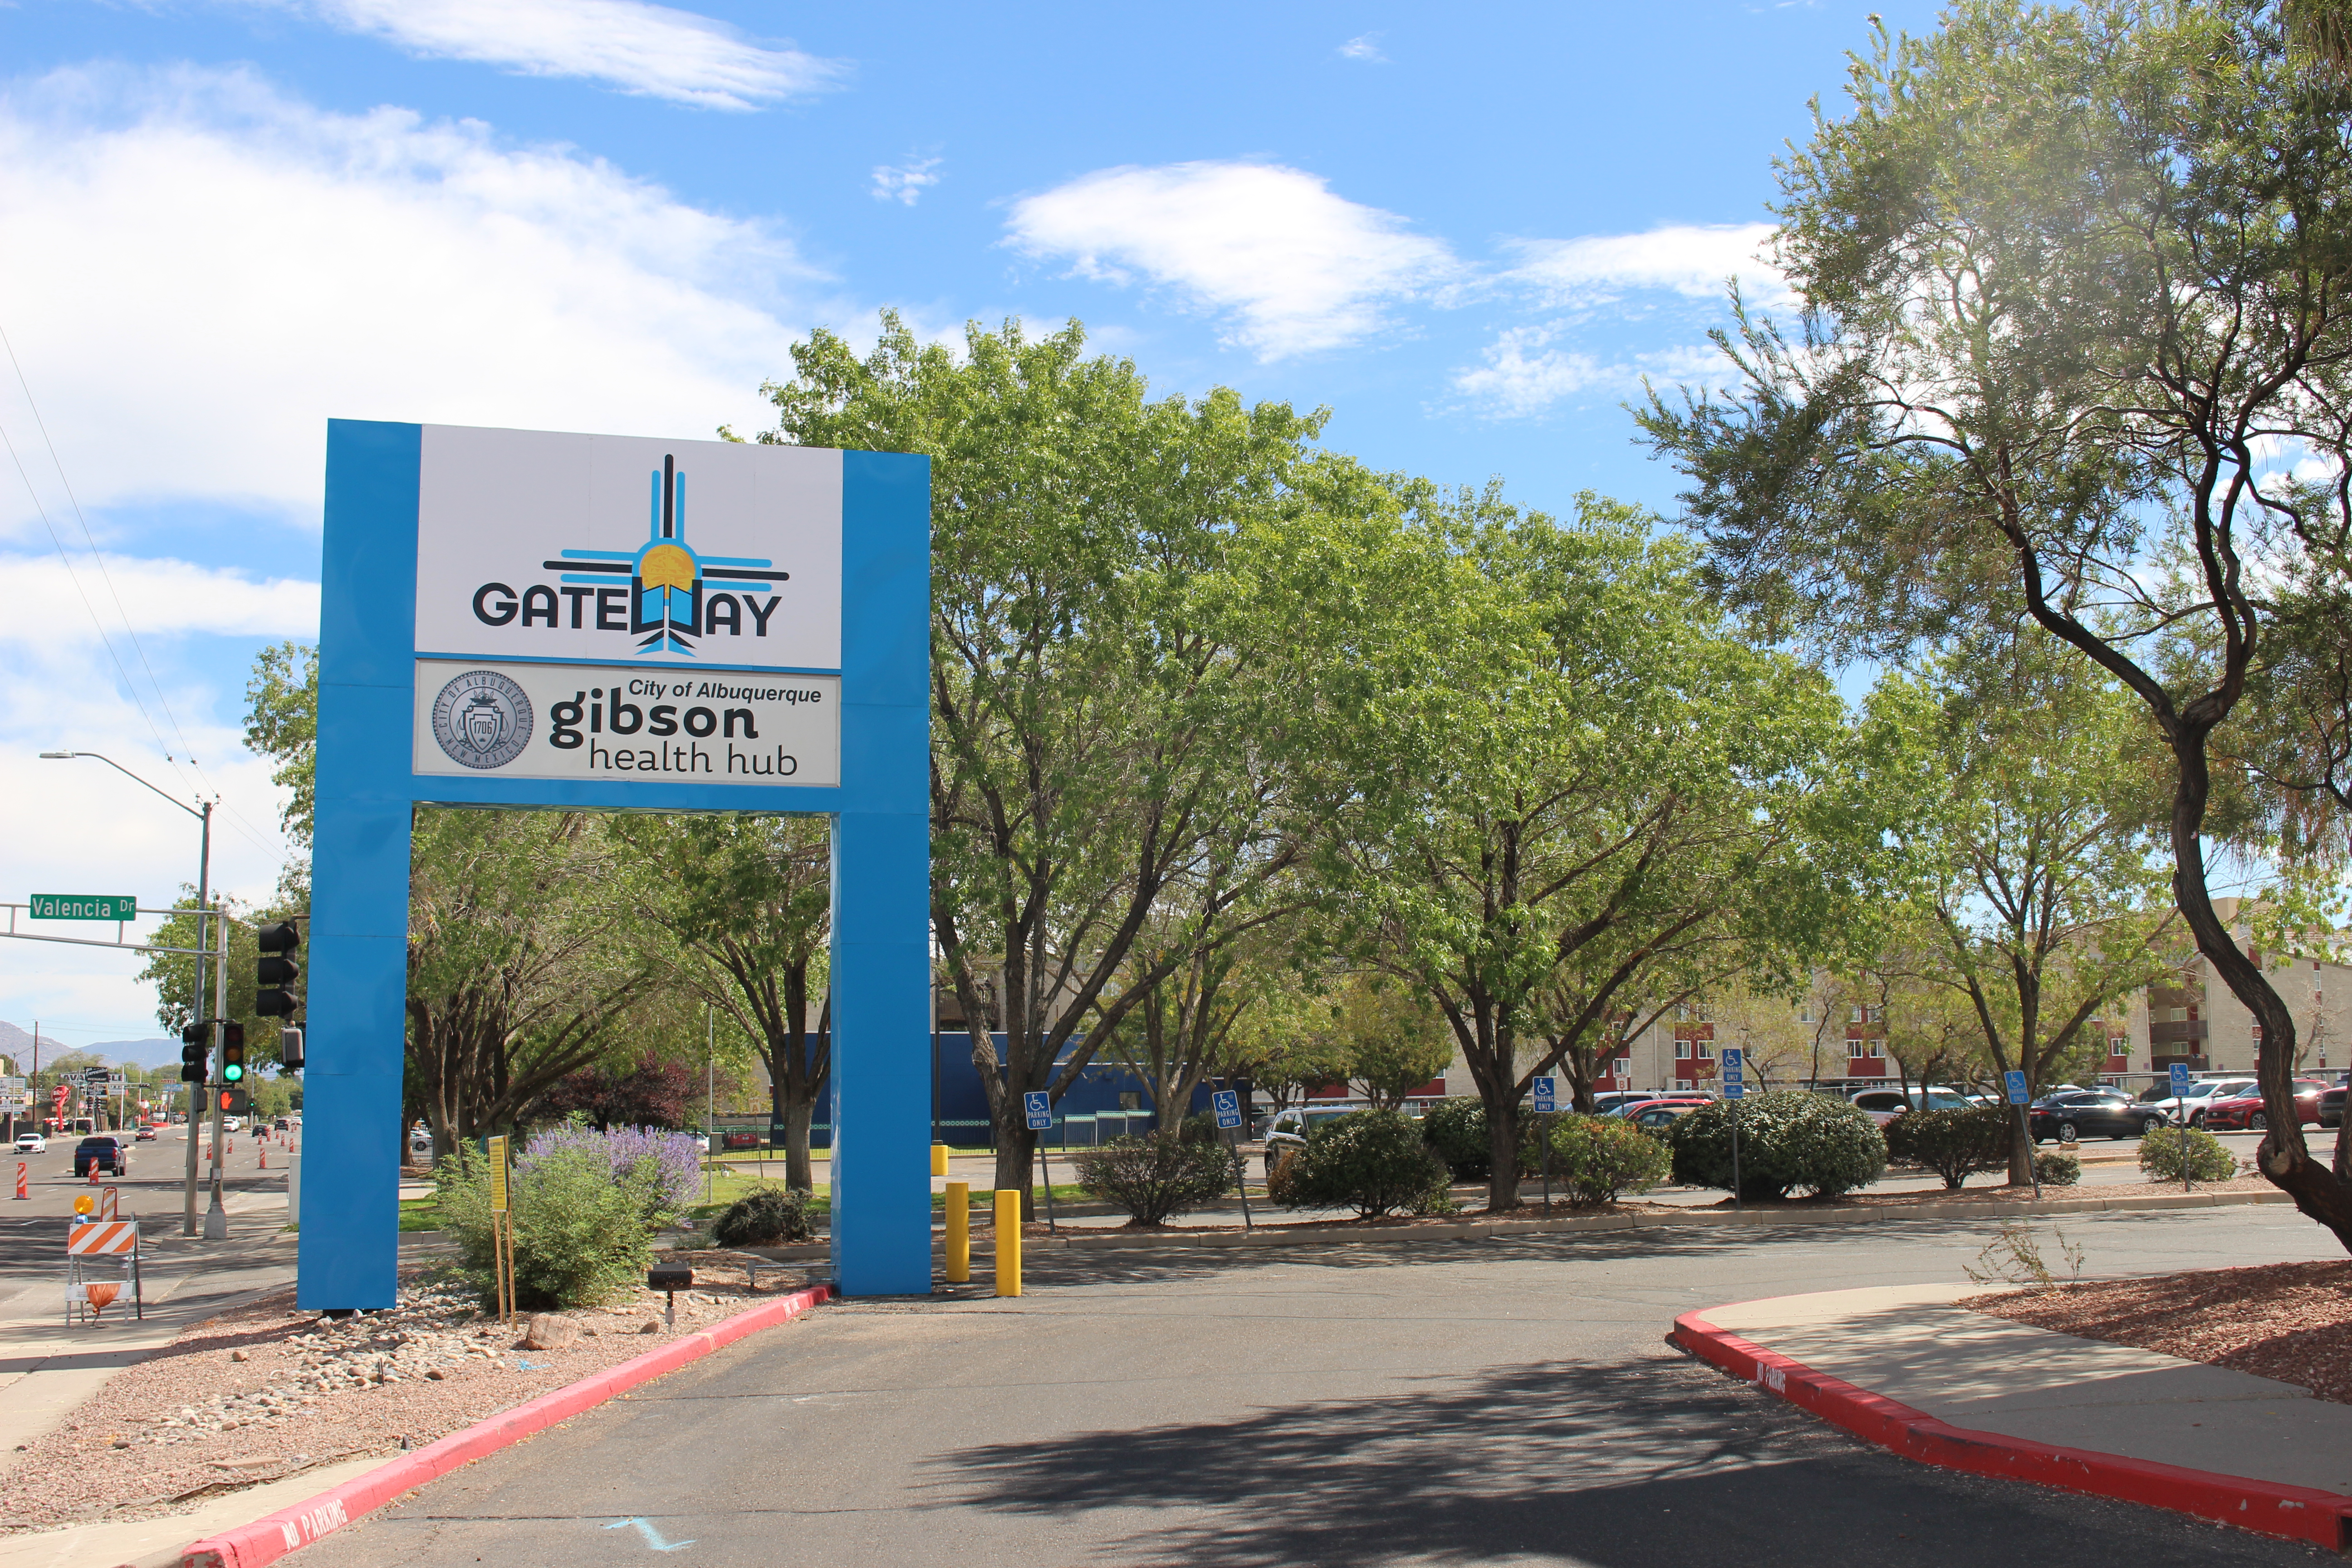 The sign at the Gateway Center in the City of Albuquerque Gibson Health Hub.